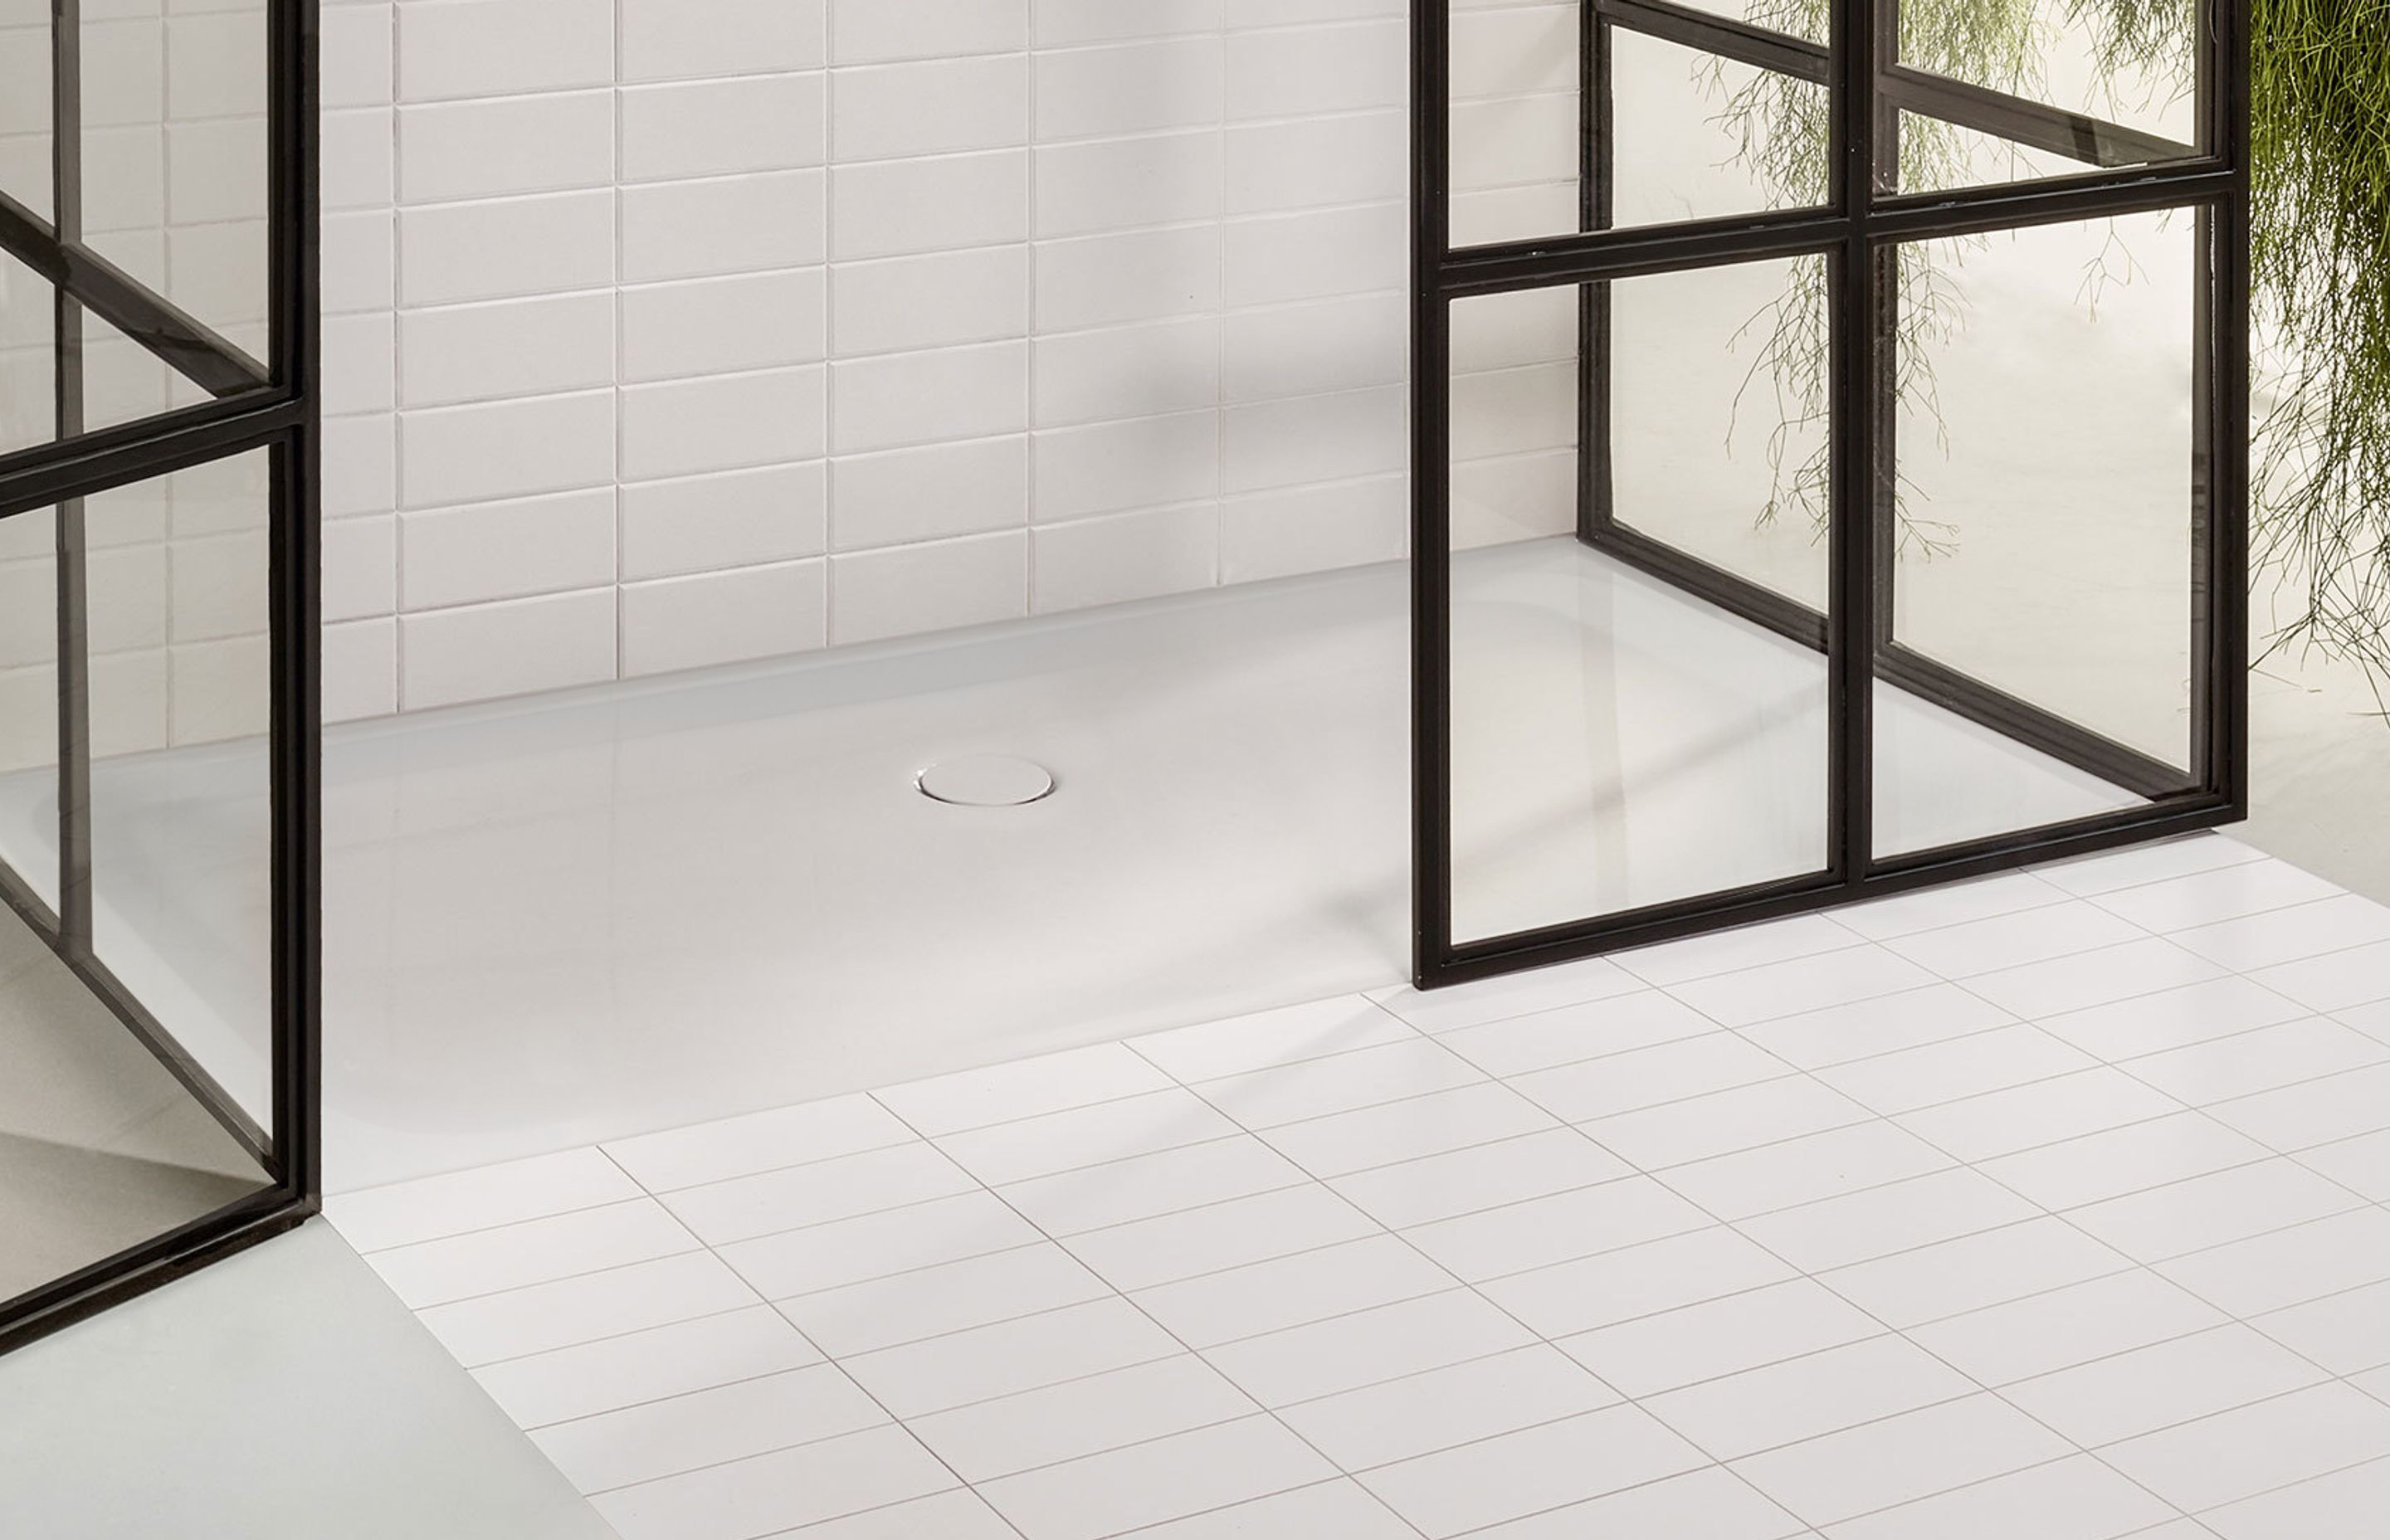 Combining an impregnable glazed surface bonded to a rigid titanium-steel base is the ideal amalgam for hard-working surfaces in the bathroom.